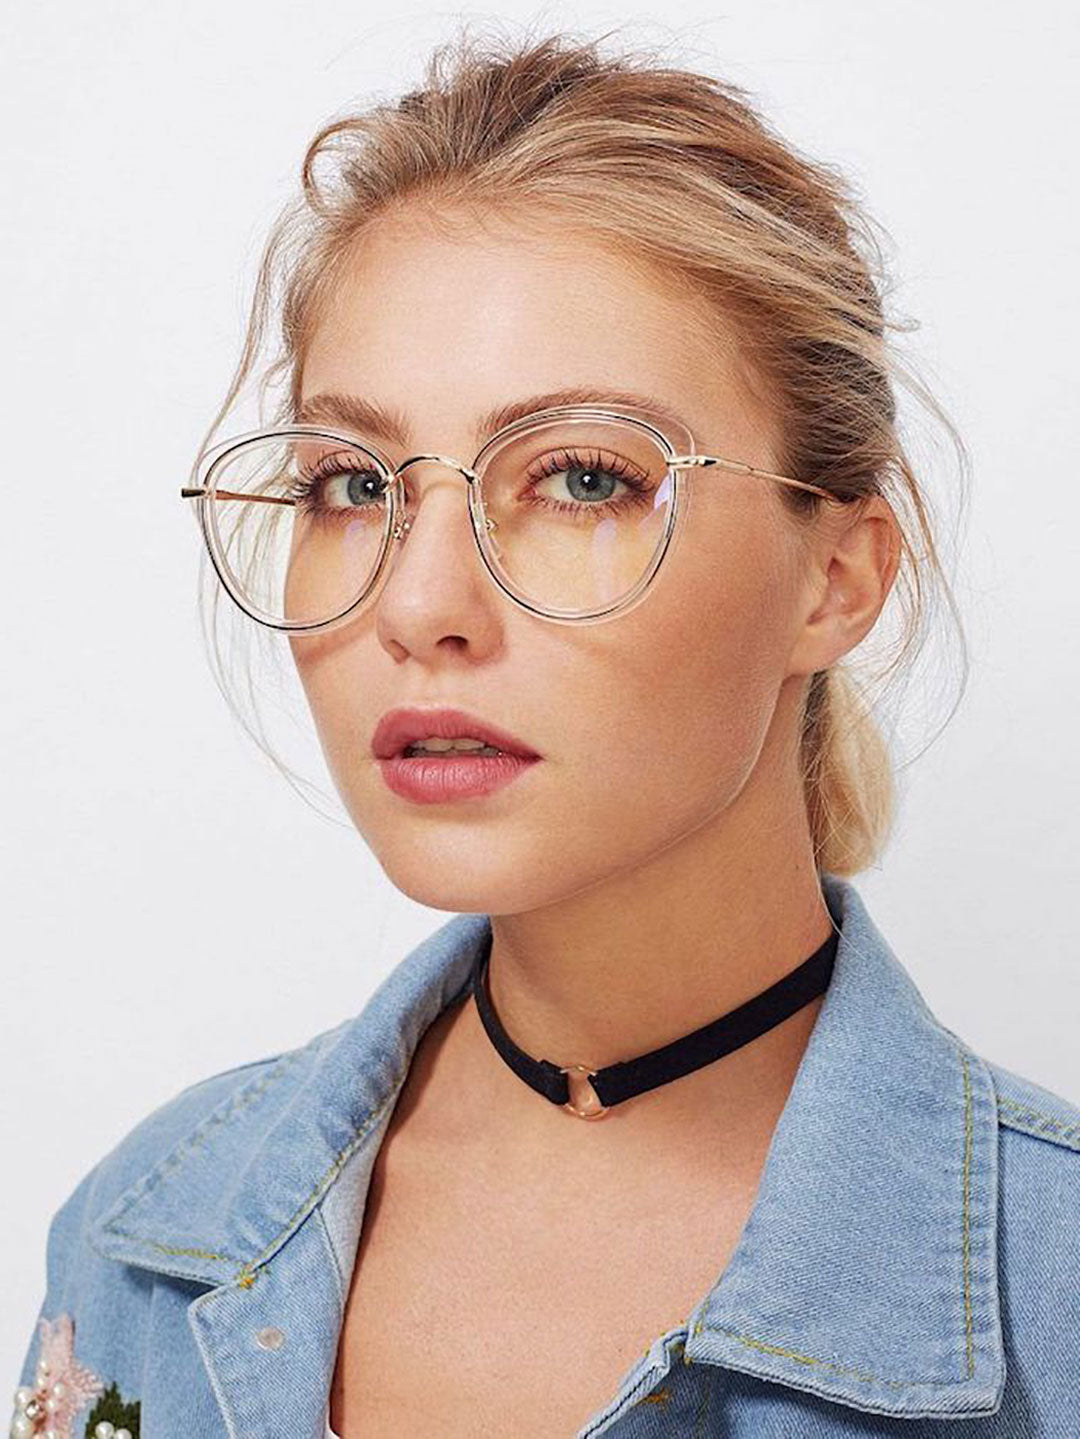 Portrait of pretty blonde lady with tied back blonde hair wearing large clear glasses frame and denim shirt looking at viewer